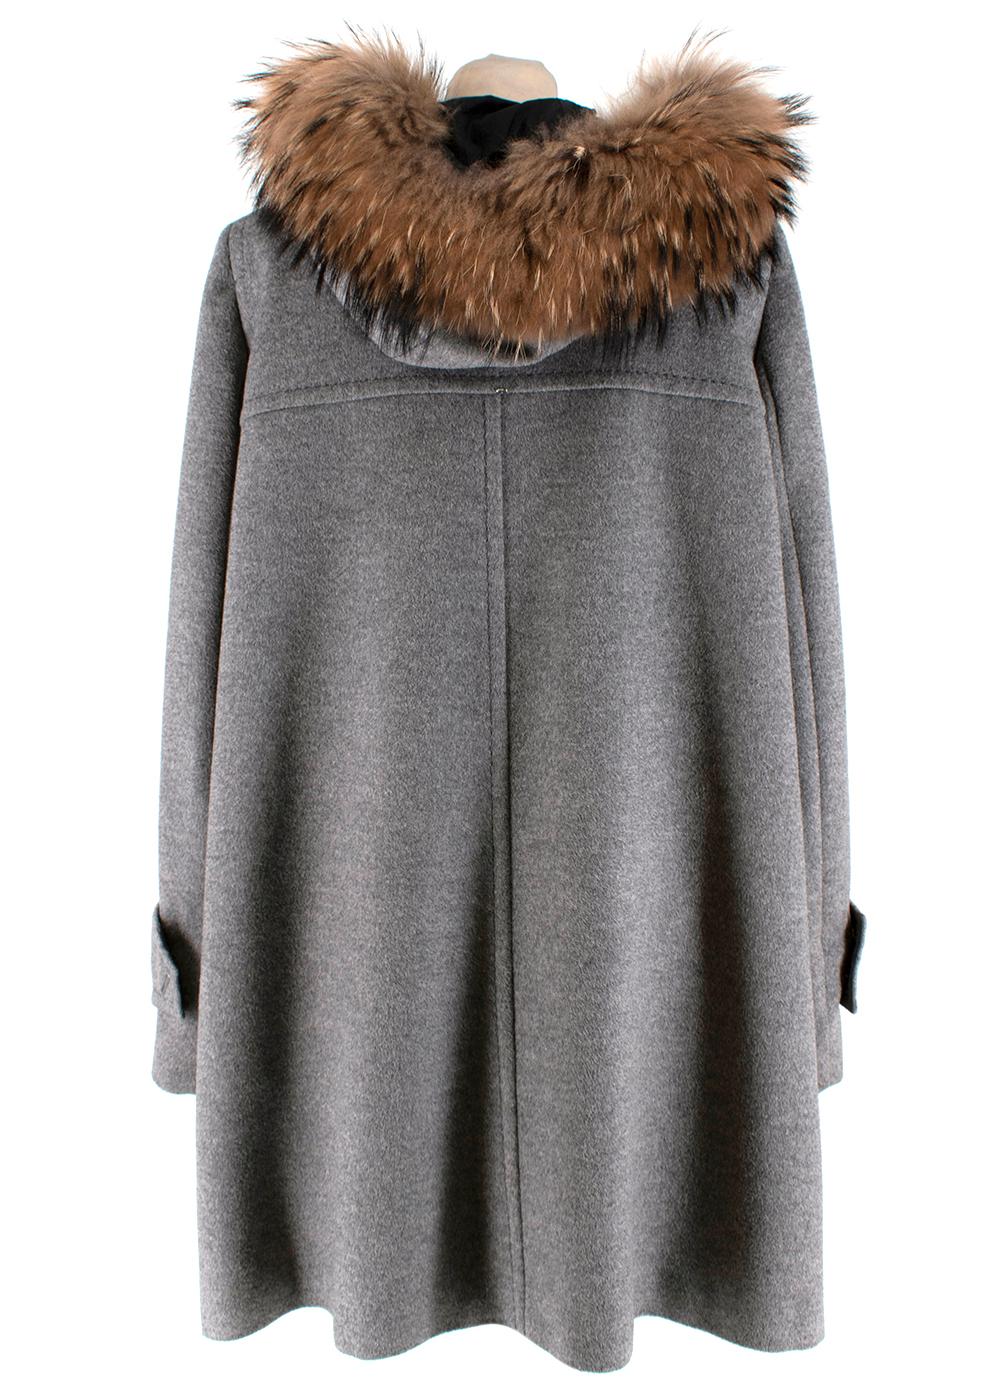 Sportmax Grey Wool Fur Trimmed Hooded Coat

-Luxurious soft wool texture 
-Gorgeous fur trim to the hood 
-Classic timeless style 
-2 way zip fastening to the front 
-Pockets to the front 
-Crystal detail to the center back 
-Top stitching details